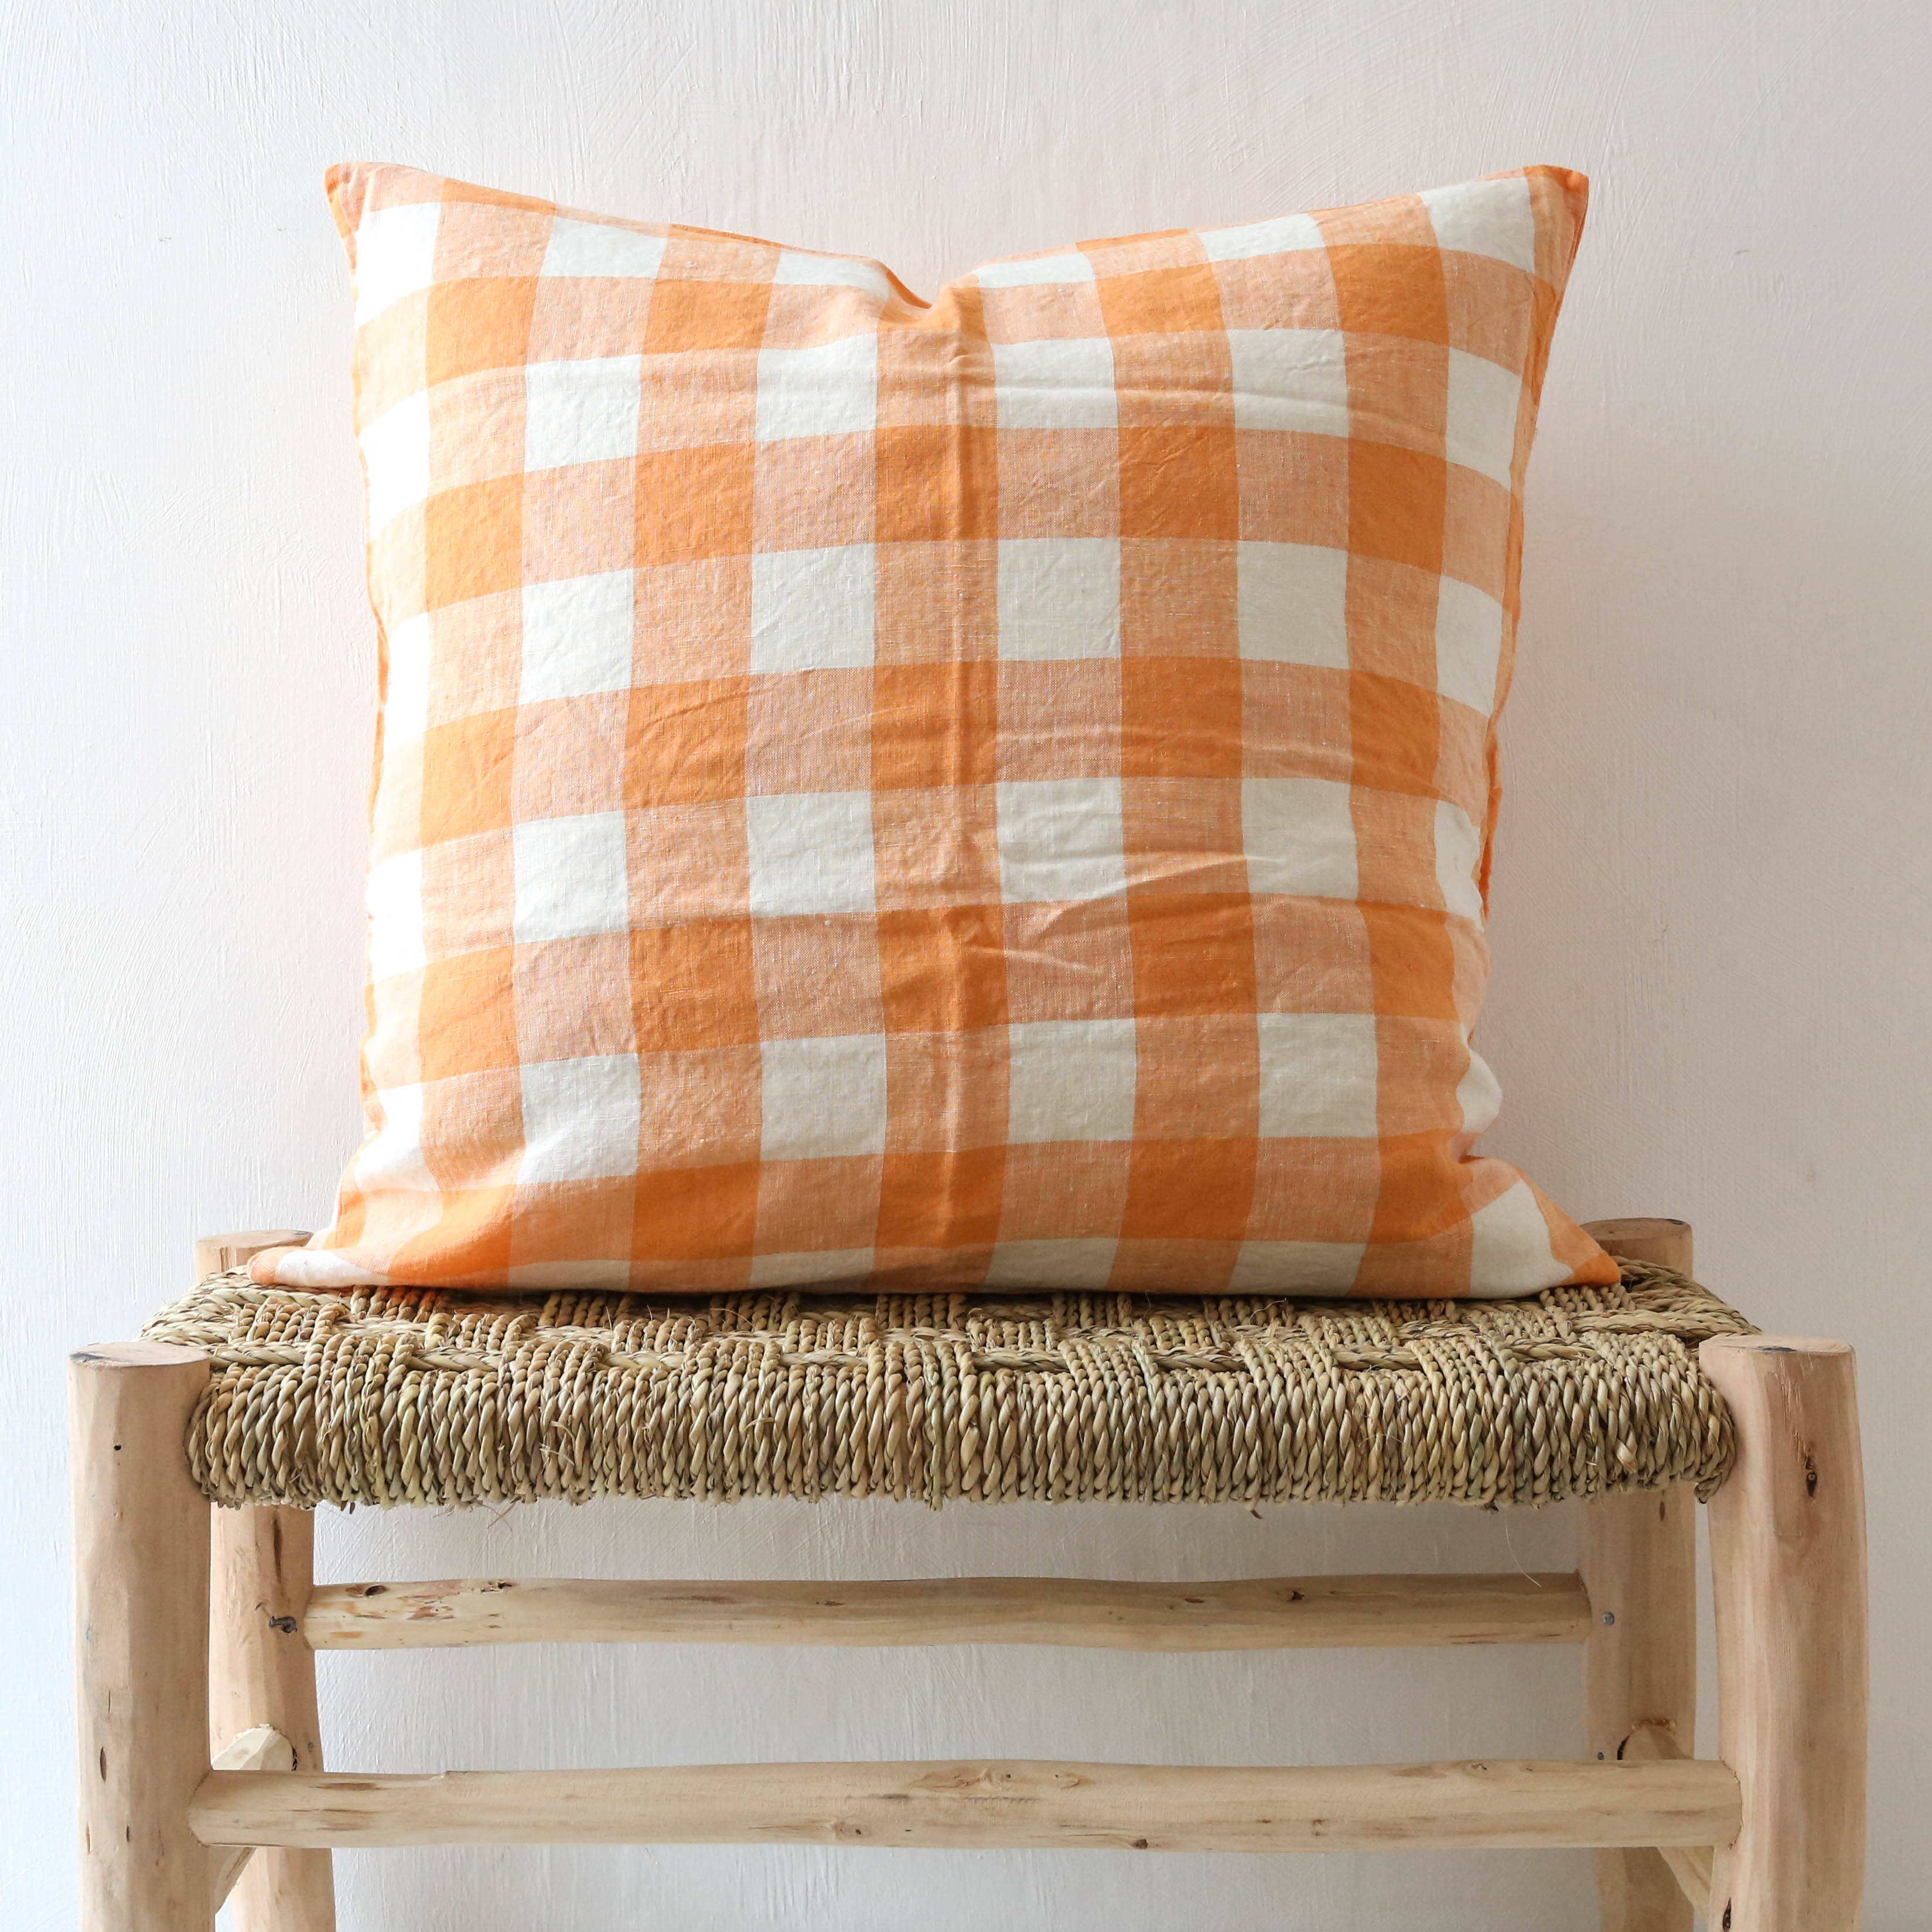 society-of-wanderers-peaches-and-cream-cushion-cover